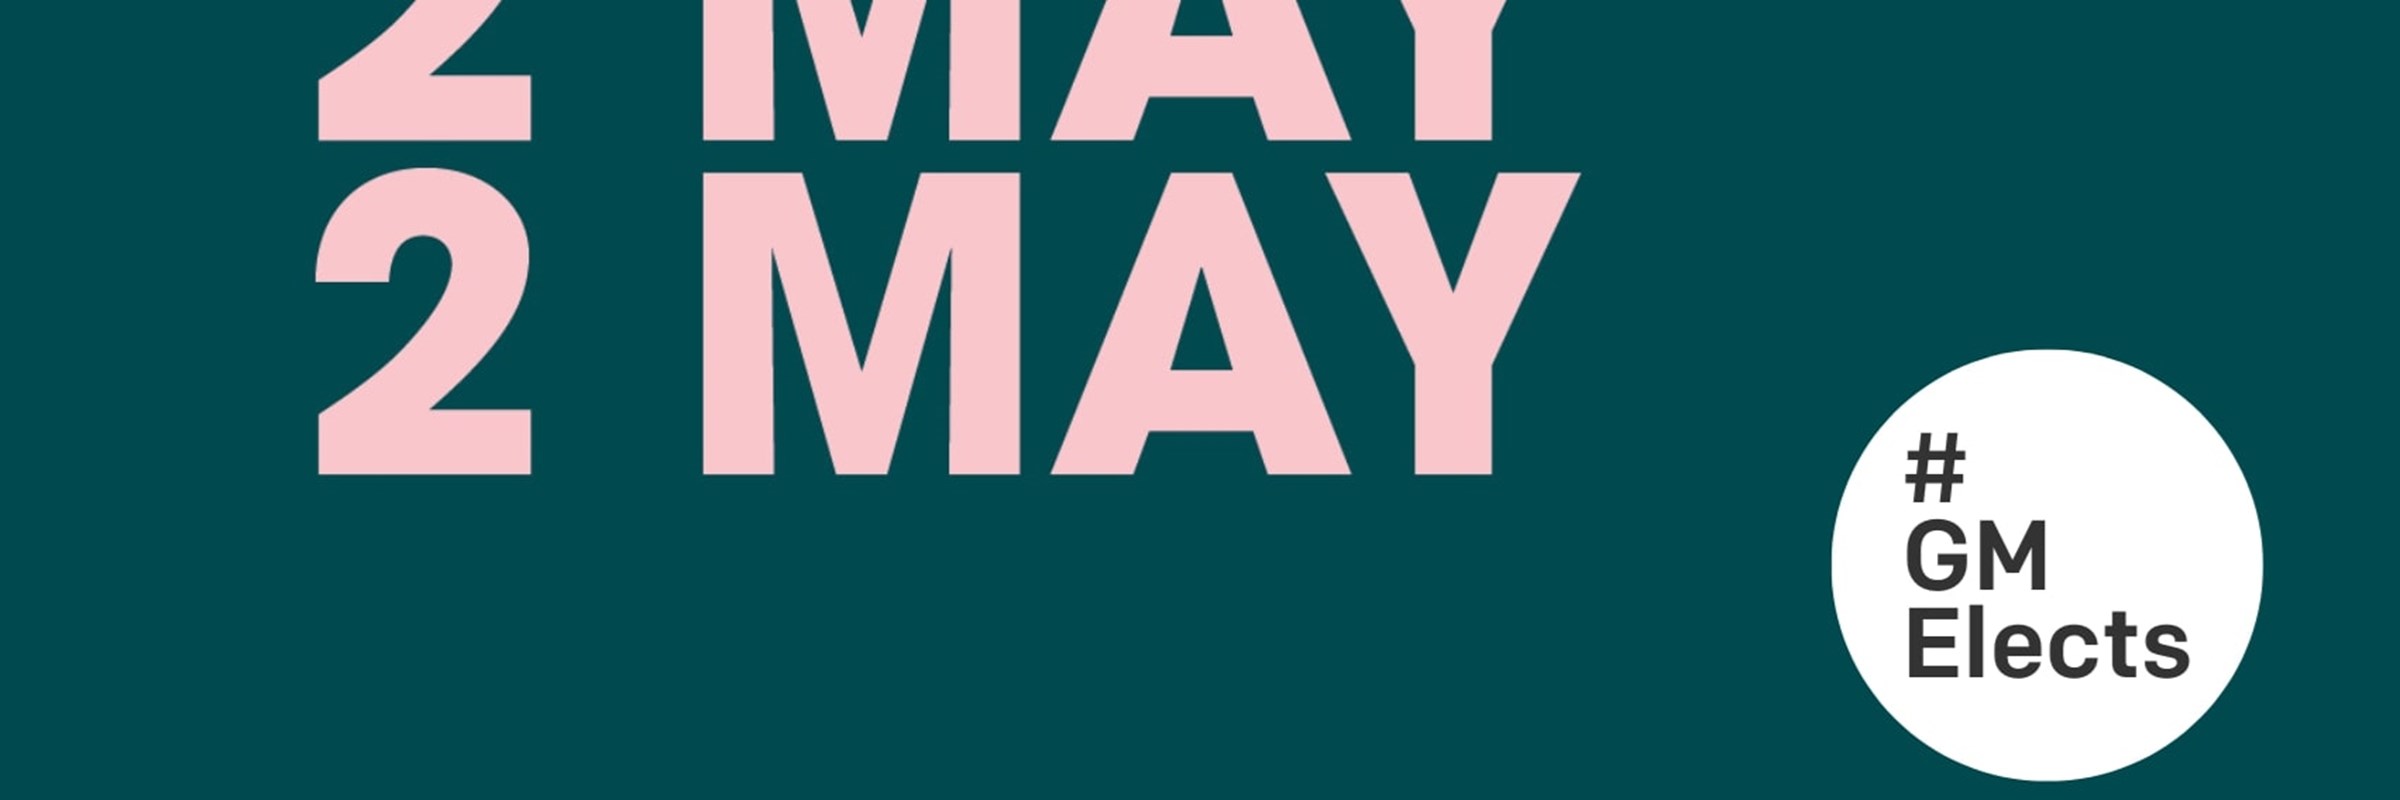 Image outlining the date of Greater Manchester local elections at 2 May.